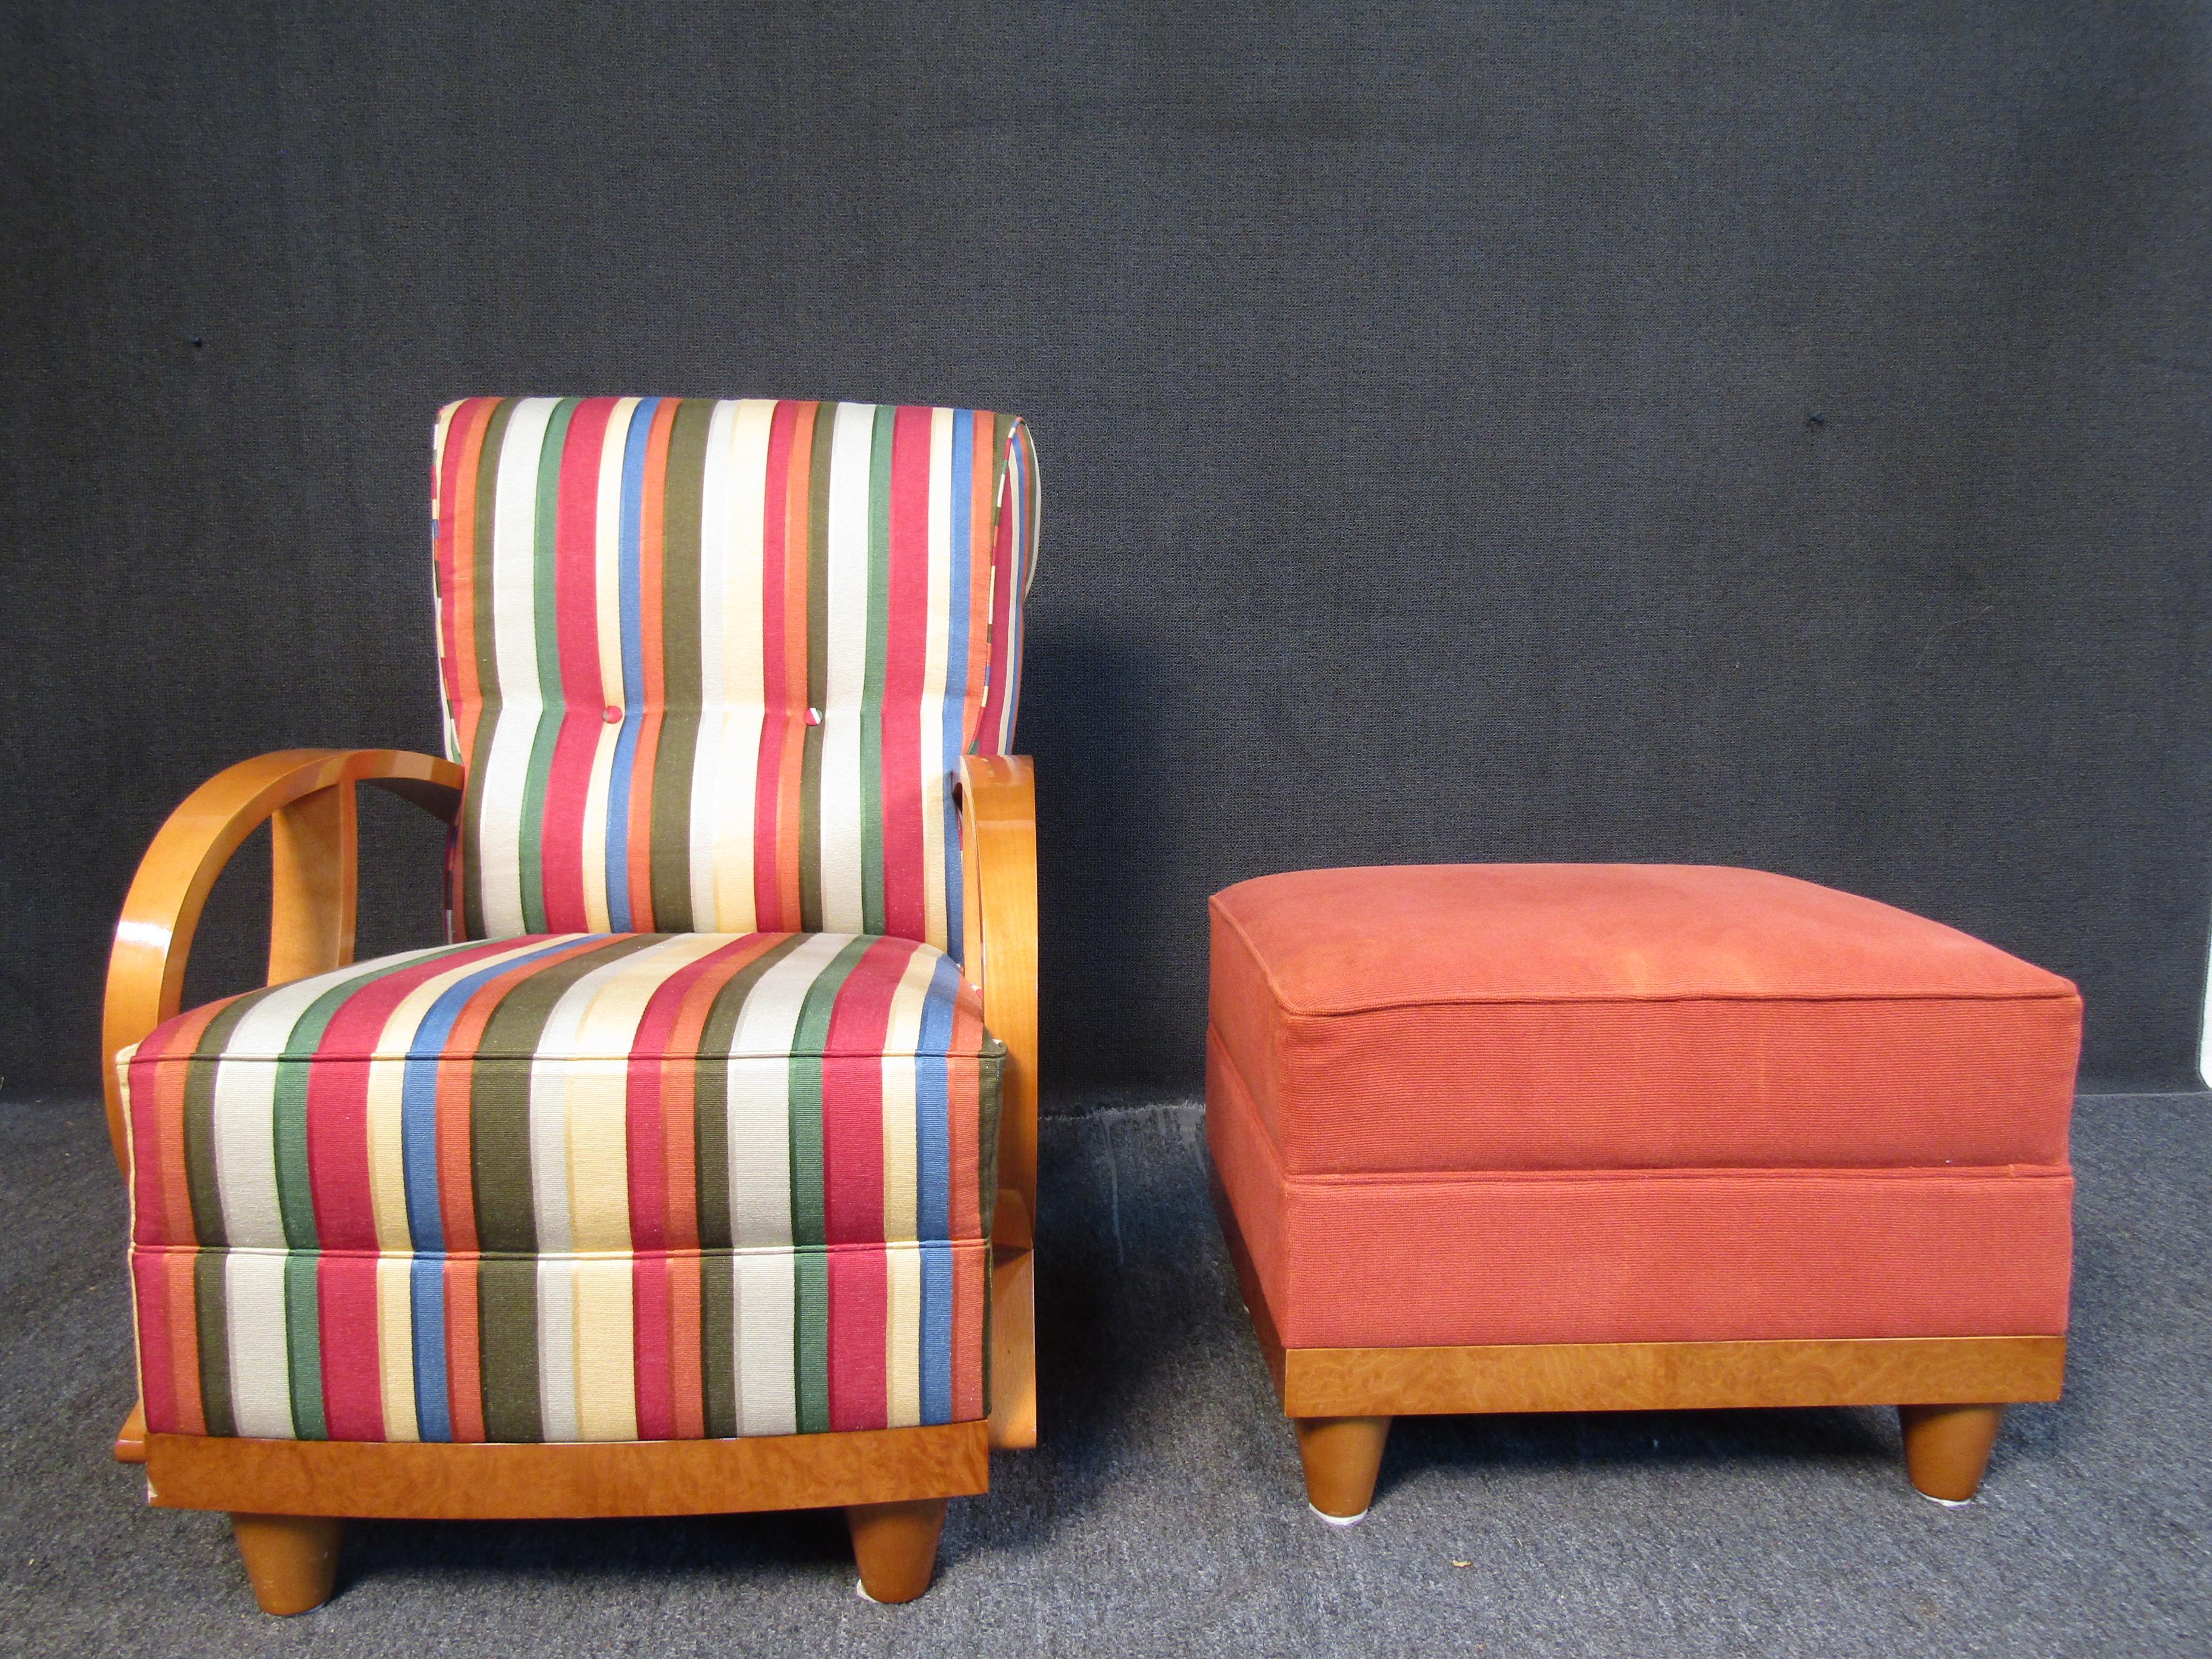 This vintage lounge chair and ottoman set by Pace Mariani features a cushioned, oversized design with colorful upholstery and wooden frame. Please confirm item location with seller (NY/NJ).